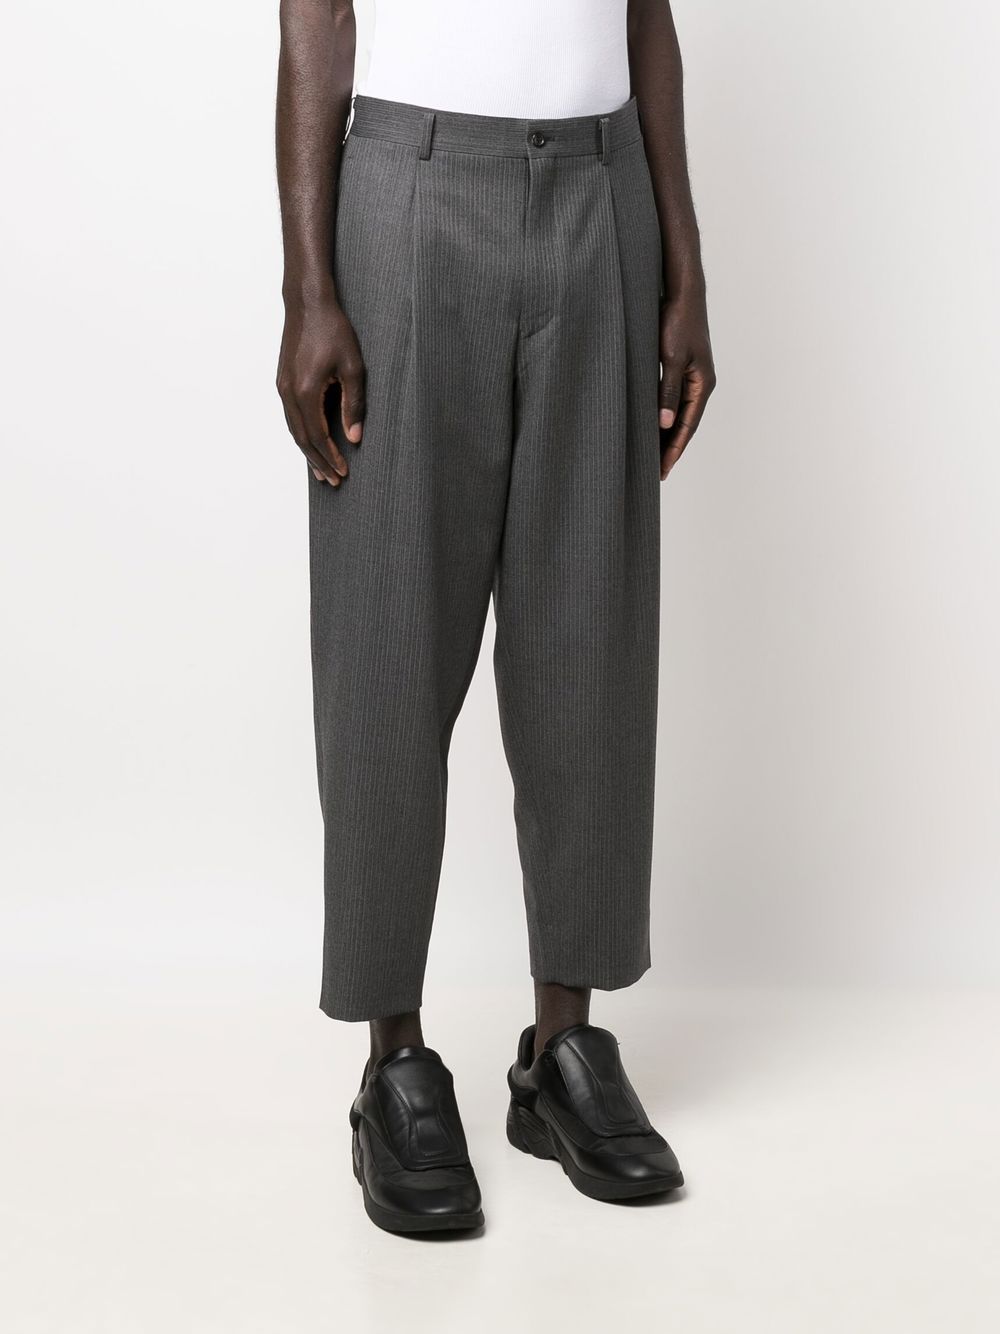 Comme Des Garçons Homme Plus Pinstripe Tapered Cropped Trousers - Farfetch